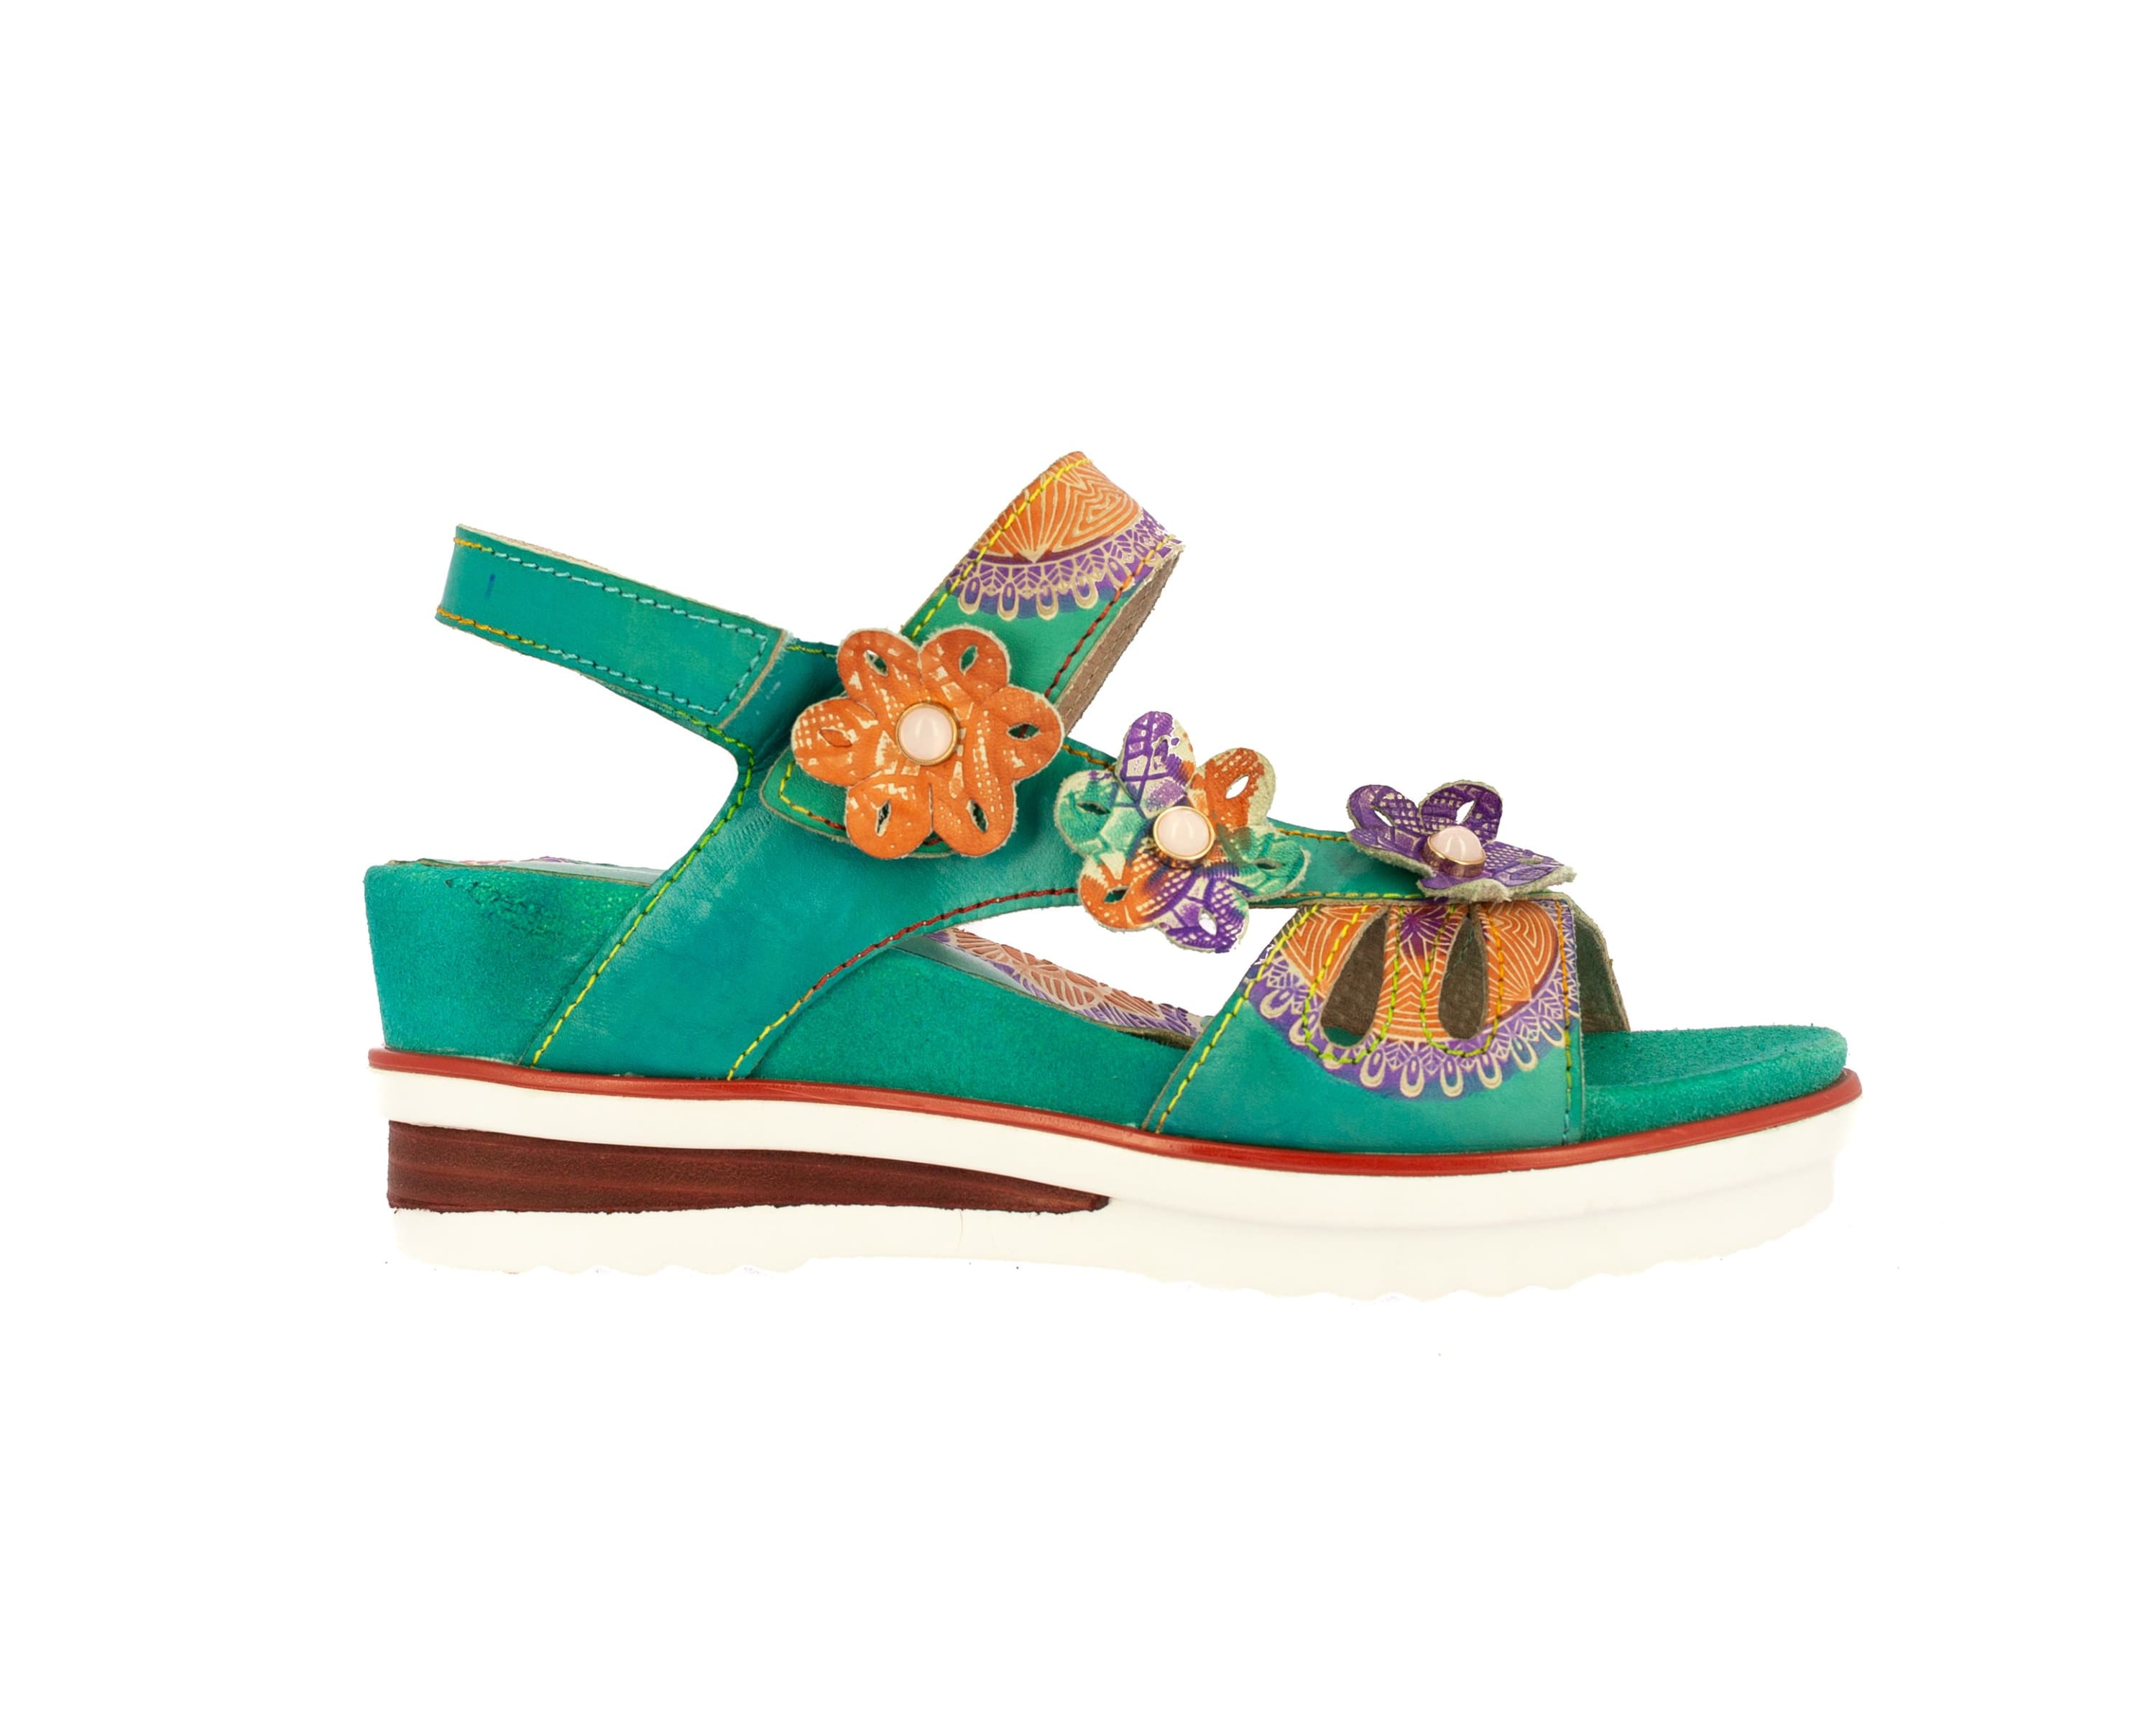 Chaussures DICEZEO 03 - 35 / TURQUOISE - Sandale